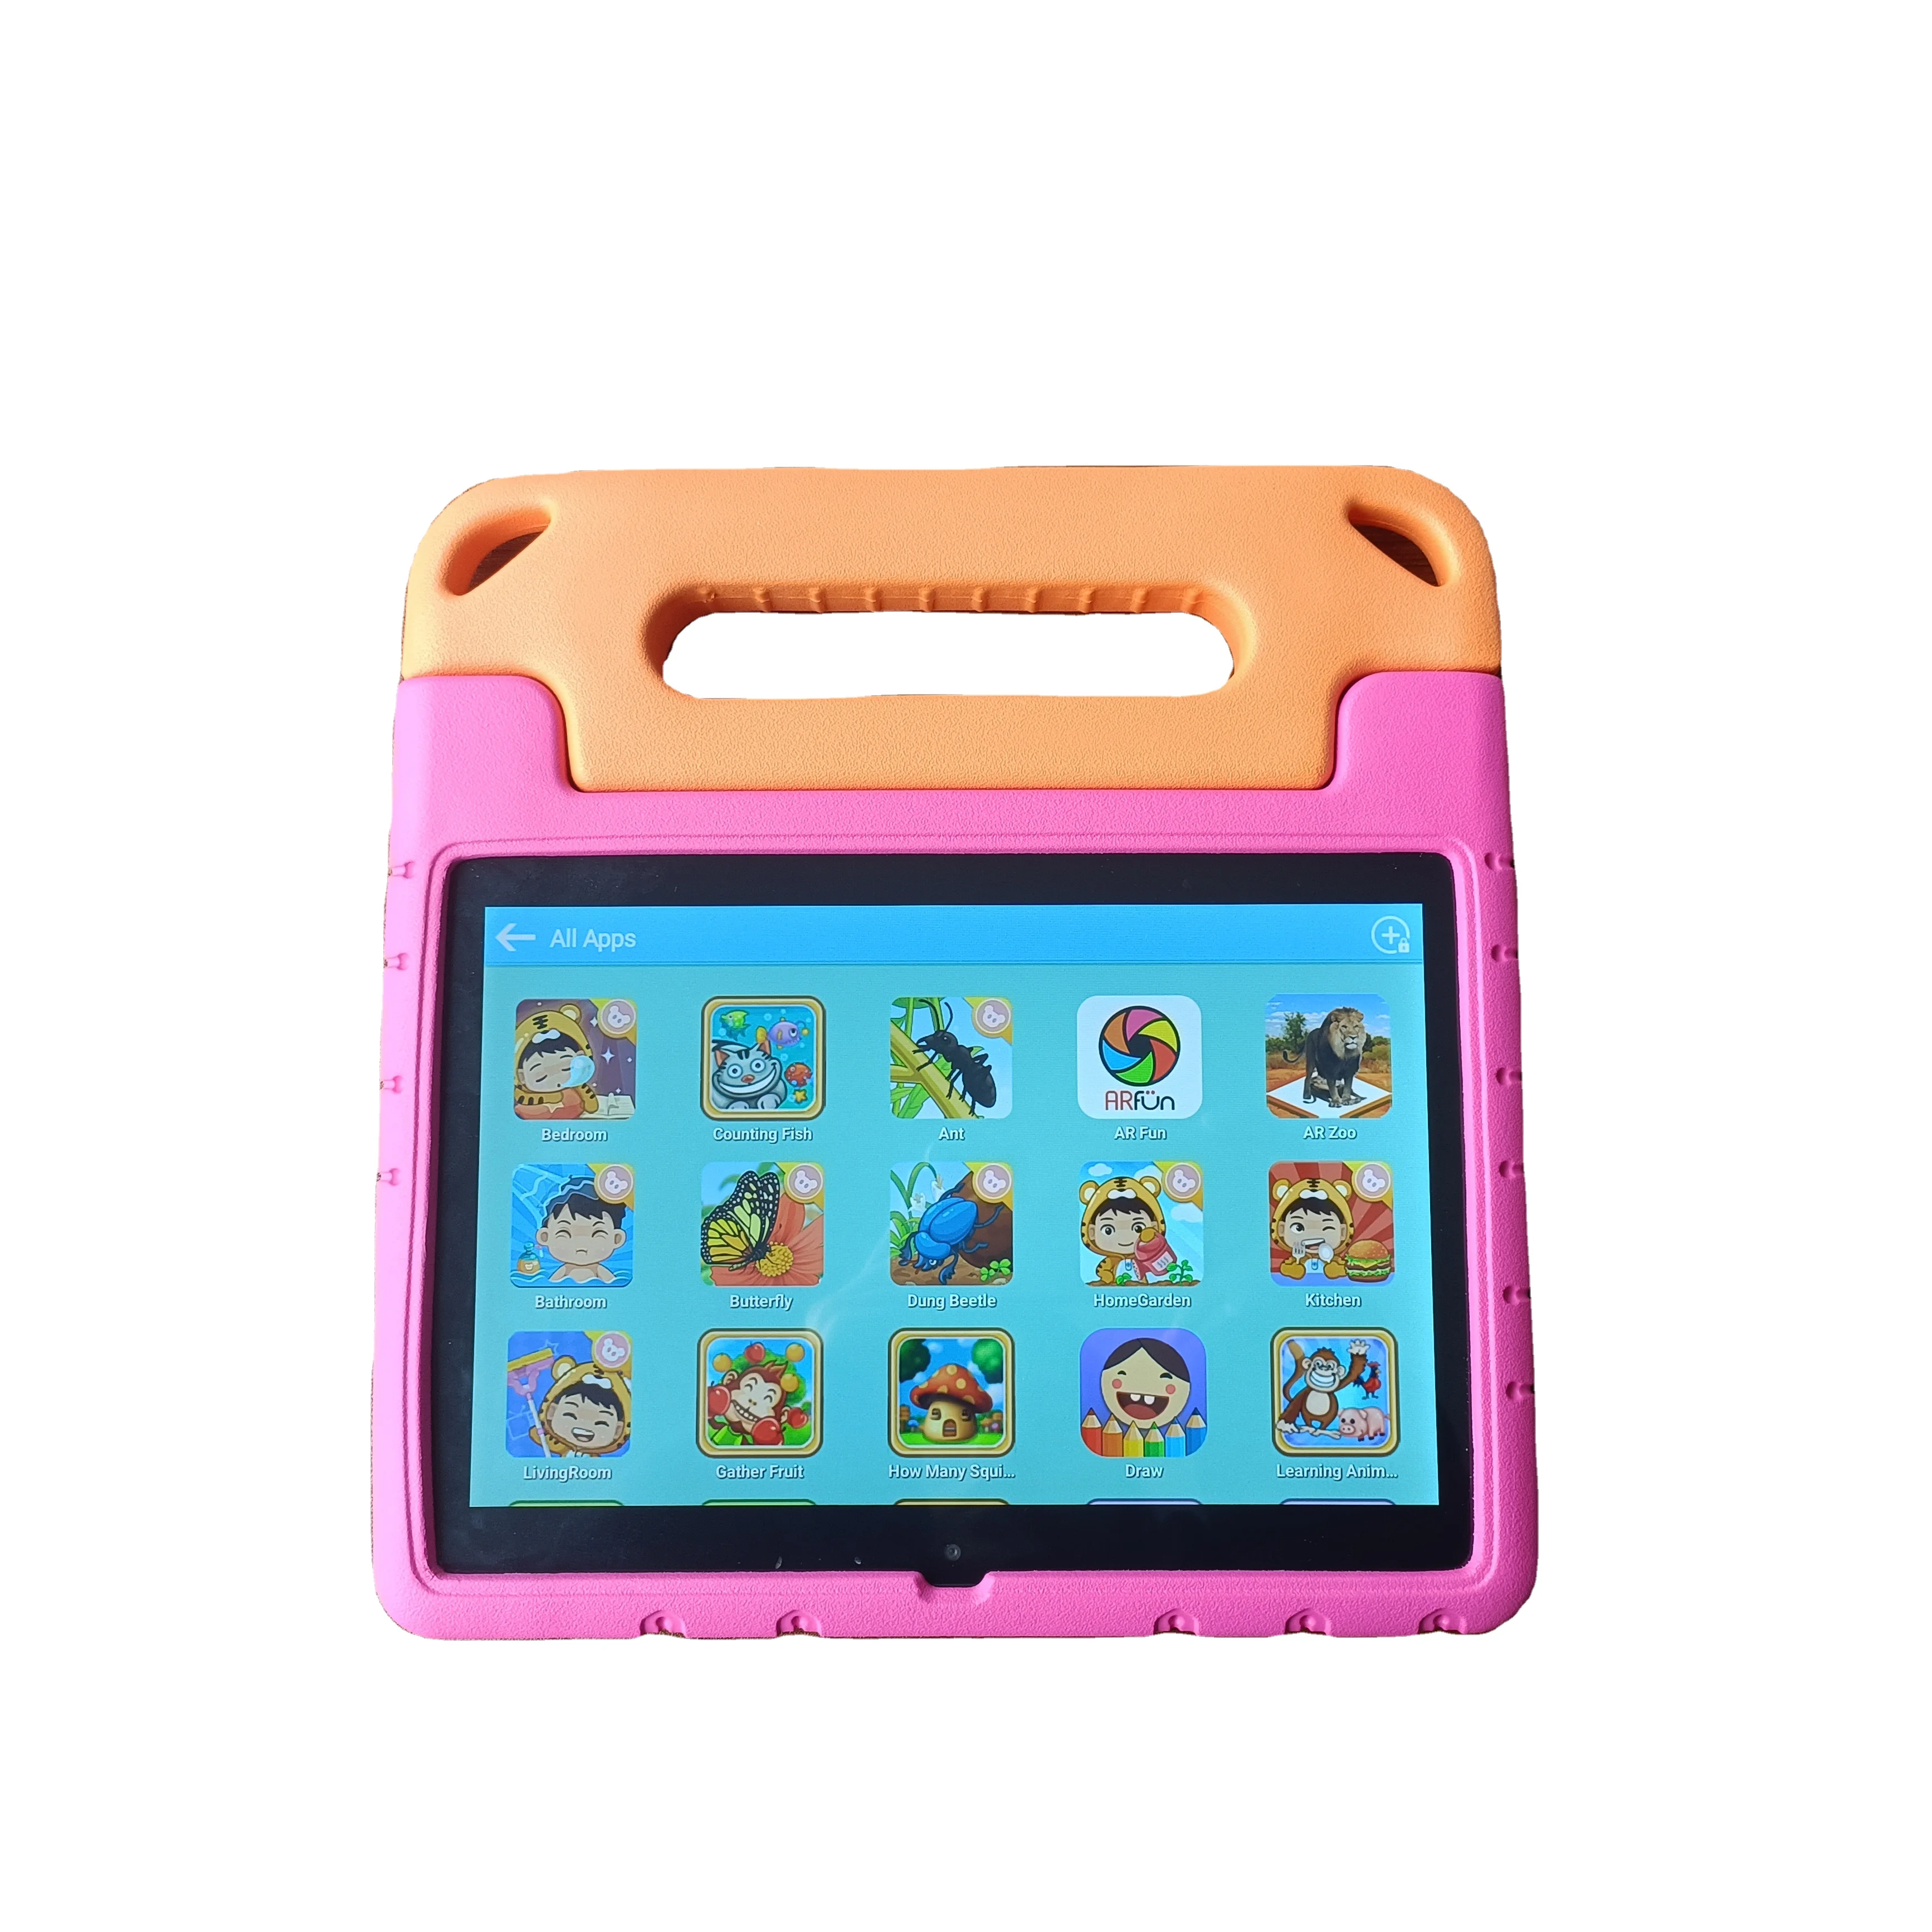 

ATOUCH KT36 10.1 Inch 1280*800 Android Kids Education Learning Tablet PC With Free Gift